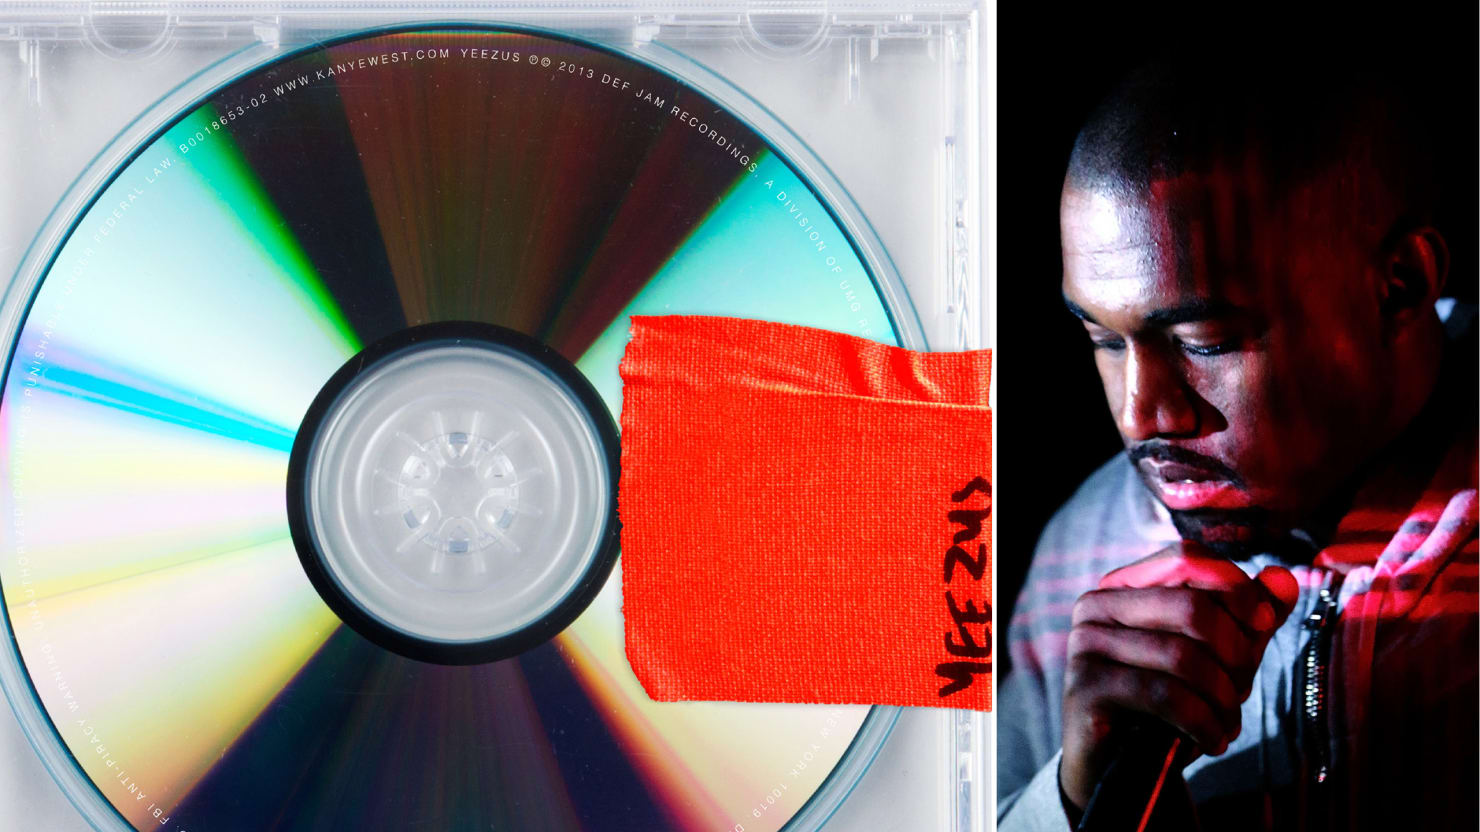 Kanye made backpack rap popular. Was he a fraud before or lying now?